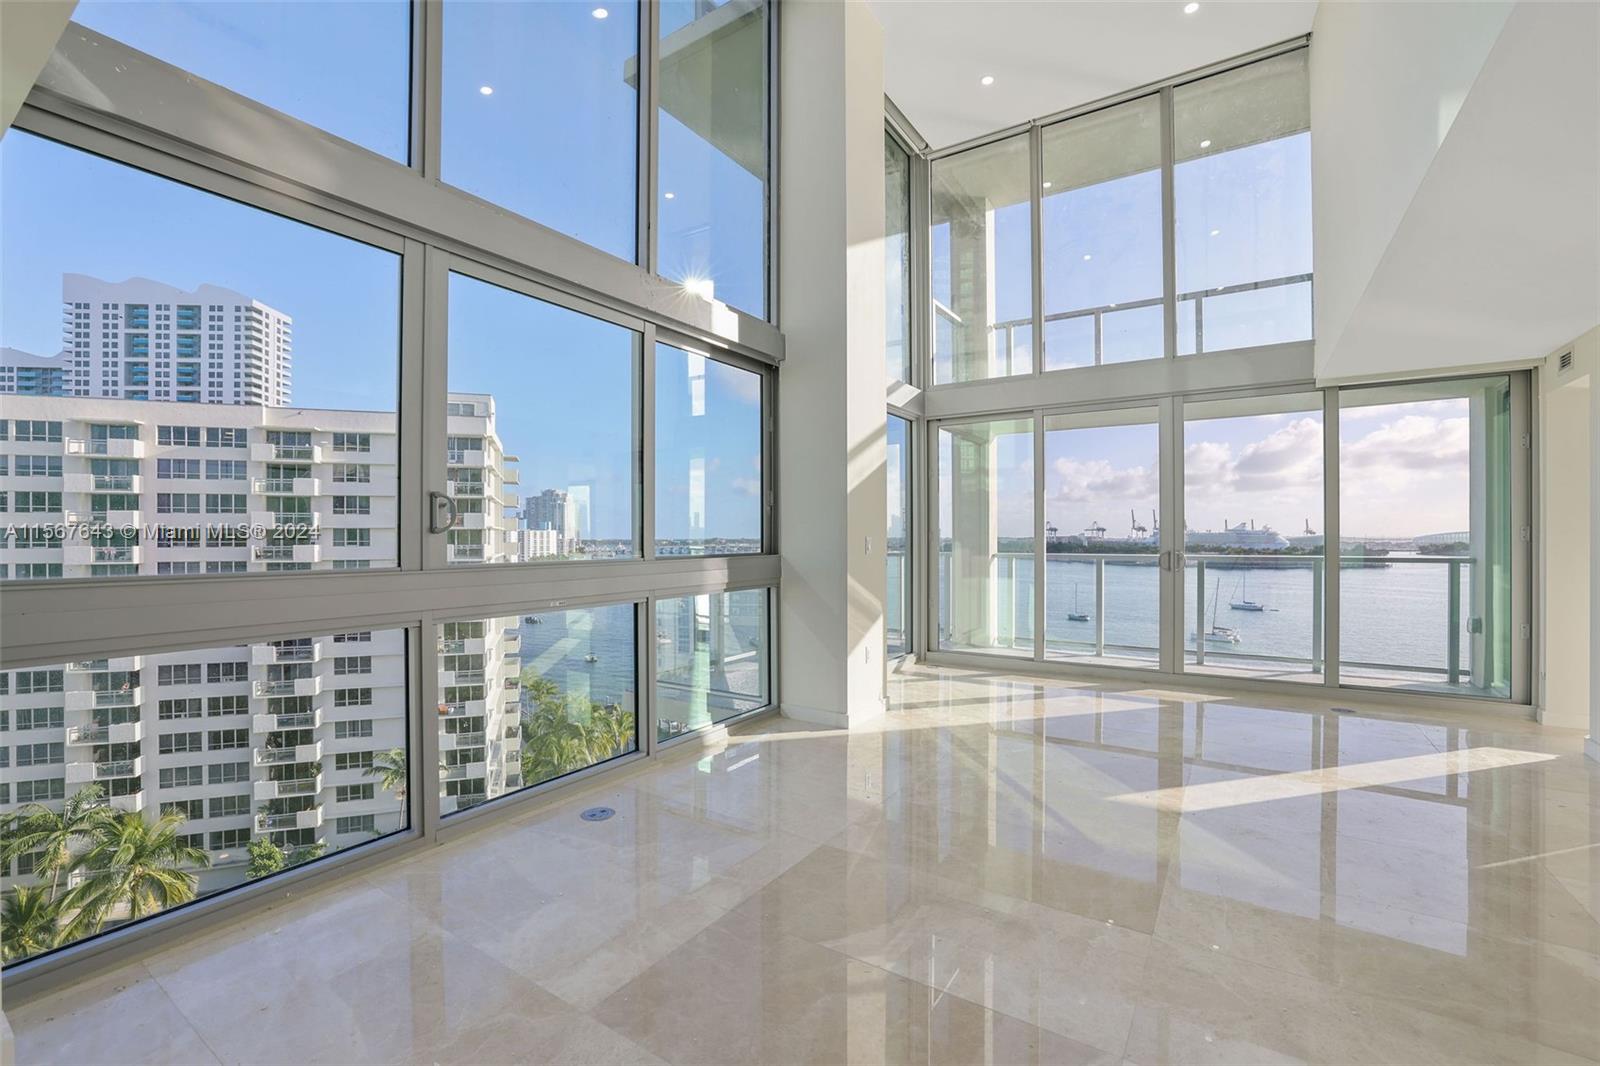 AVAILABLE 05/25 (UNIT CAN'T BE SHOWN TILL AVAILABLE DATE). This two-story unit has unobstructed Bay views of the Miami skyline and features French vanilla marble floors, Monte Bianco marble countertops, modern kitchen w/ Sub Zero Wolf Appliances, floor to ceiling windows w/ views of the bay and balconies facing the water. Amenities include fitness center, two resort style pools and cabanas, BBQ area, onsite restaurants and much more. Move in cost are 1st month + $5K dep. Pet Fee: $400+$50/month. *FAST APPROVAL! (NOTE: Rental rates are subject to change depending on move-in date and lease term. Advertised rate is best rate and maybe on leases longer than 12 months. Income must be greater than 3x one month's rent and minimum credit score of 620 in order to be approved).